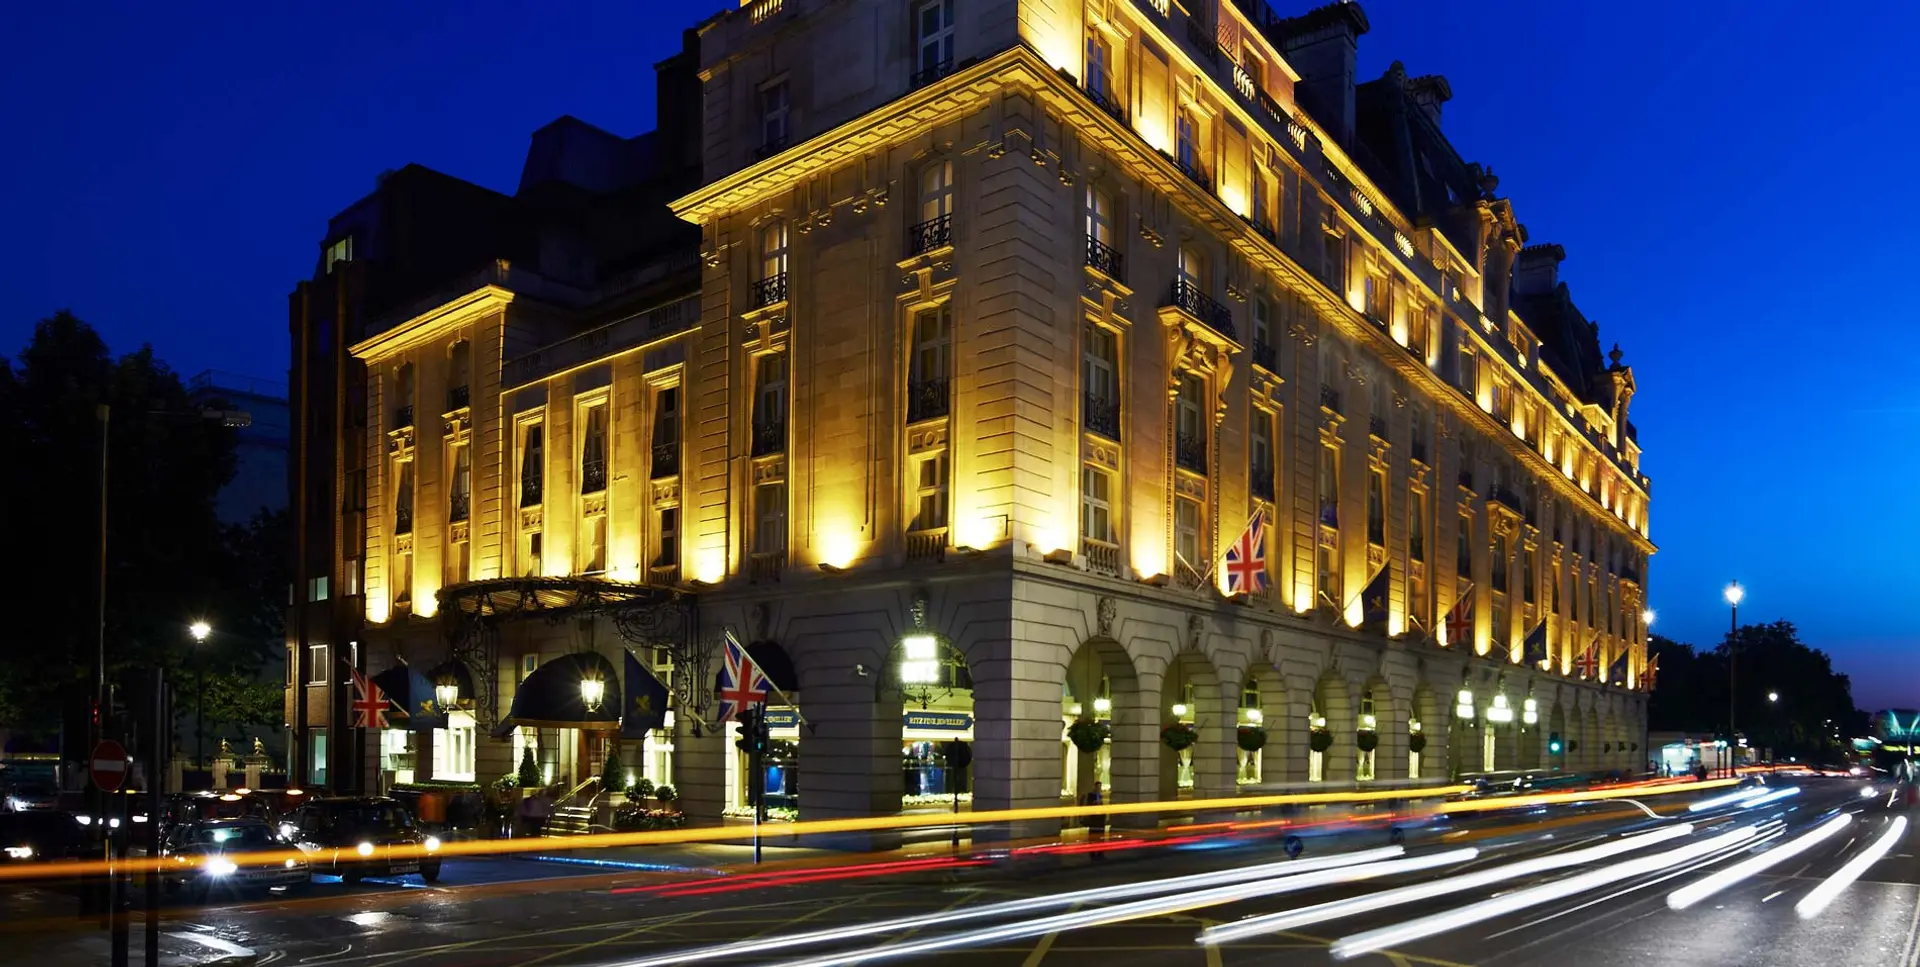 Hotel review Location' - The Ritz London - 1